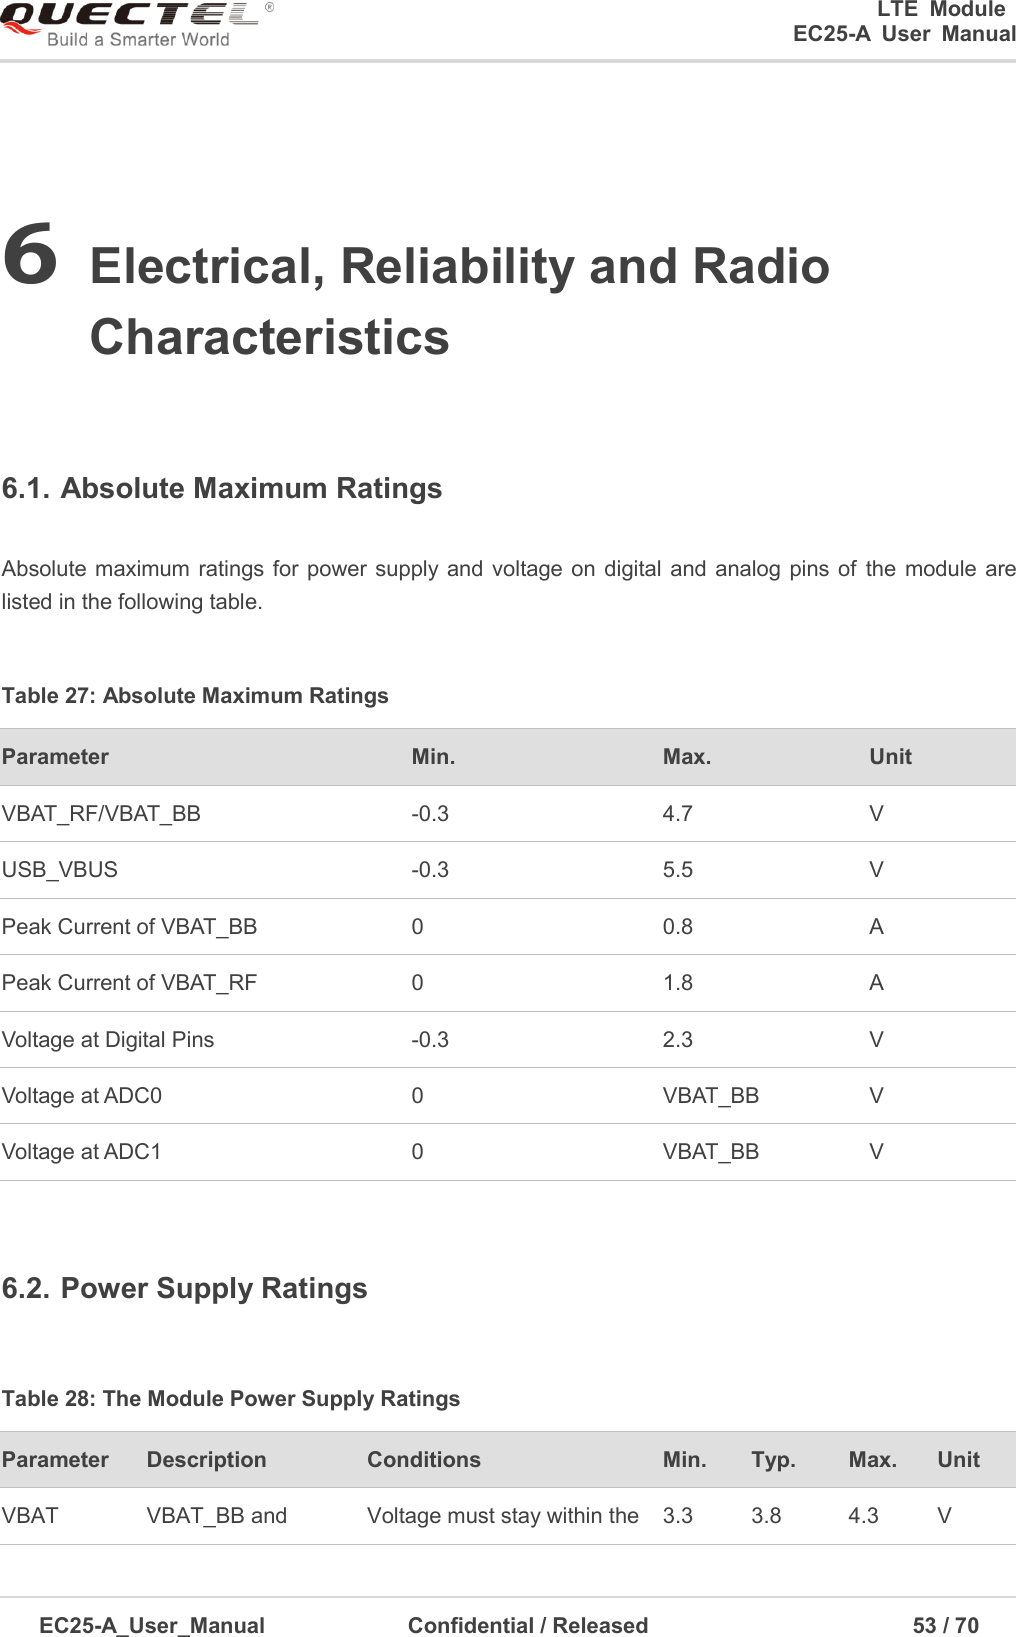 0      LTE  Module      EC25-A  User  Manual EC25-A_User_Manual  Confidential / Released      53 / 7  6 Electrical, Reliability and RadioCharacteristics 6.1. Absolute Maximum Ratings Absolute maximum ratings for power supply and voltage on  digital and analog pins of  the module are listed in the following table. Table 27: Absolute Maximum Ratings Parameter Min. Max. Unit VBAT_RF/VBAT_BB -0.3 4.7 V USB_VBUS -0.3 5.5 V Peak Current of VBAT_BB 0 0.8 A Peak Current of VBAT_RF 0 1.8 A Voltage at Digital Pins -0.3 2.3 V Voltage at ADC0 0 VBAT_BB V Voltage at ADC1 0 VBAT_BB V 6.2. Power Supply Ratings Table 28: The Module Power Supply Ratings Parameter Description Conditions Min. Typ. Max. Unit VBAT VBAT_BB and Voltage must stay within the 3.3 3.8 4.3 V 